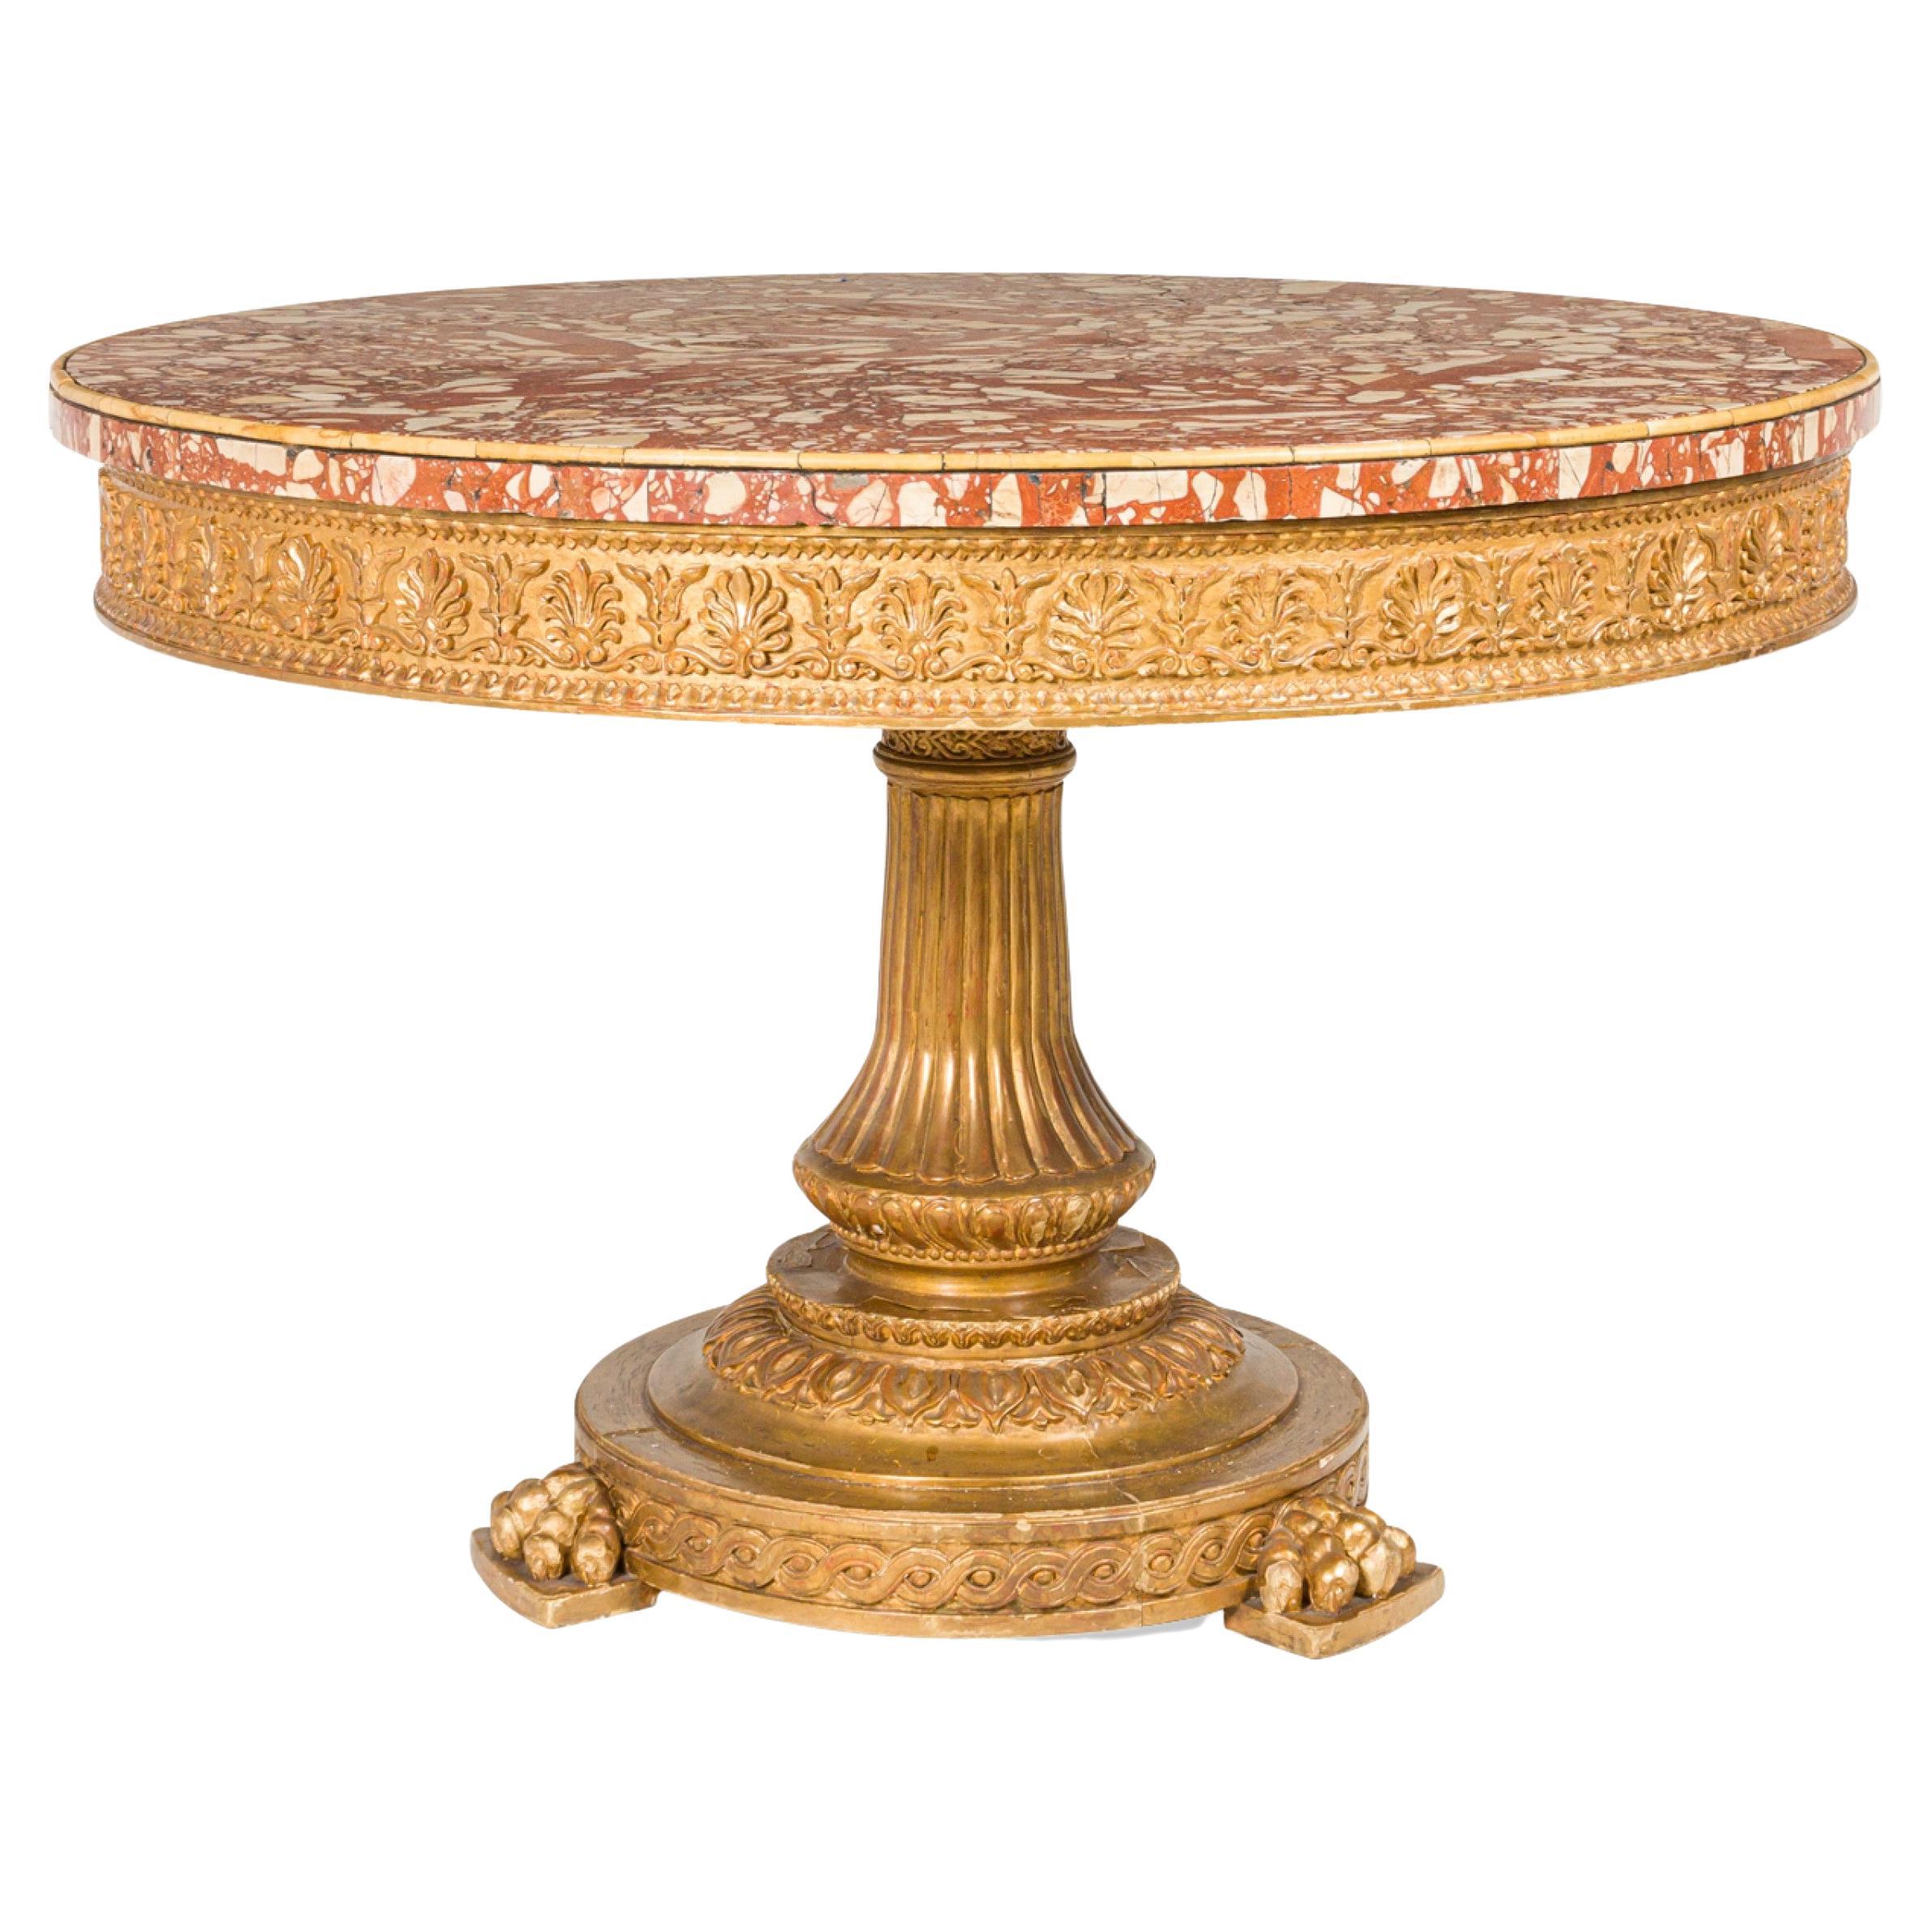 Italian Neoclassic Giltwood and Breccia Rosso Marble Circular Center Table For Sale